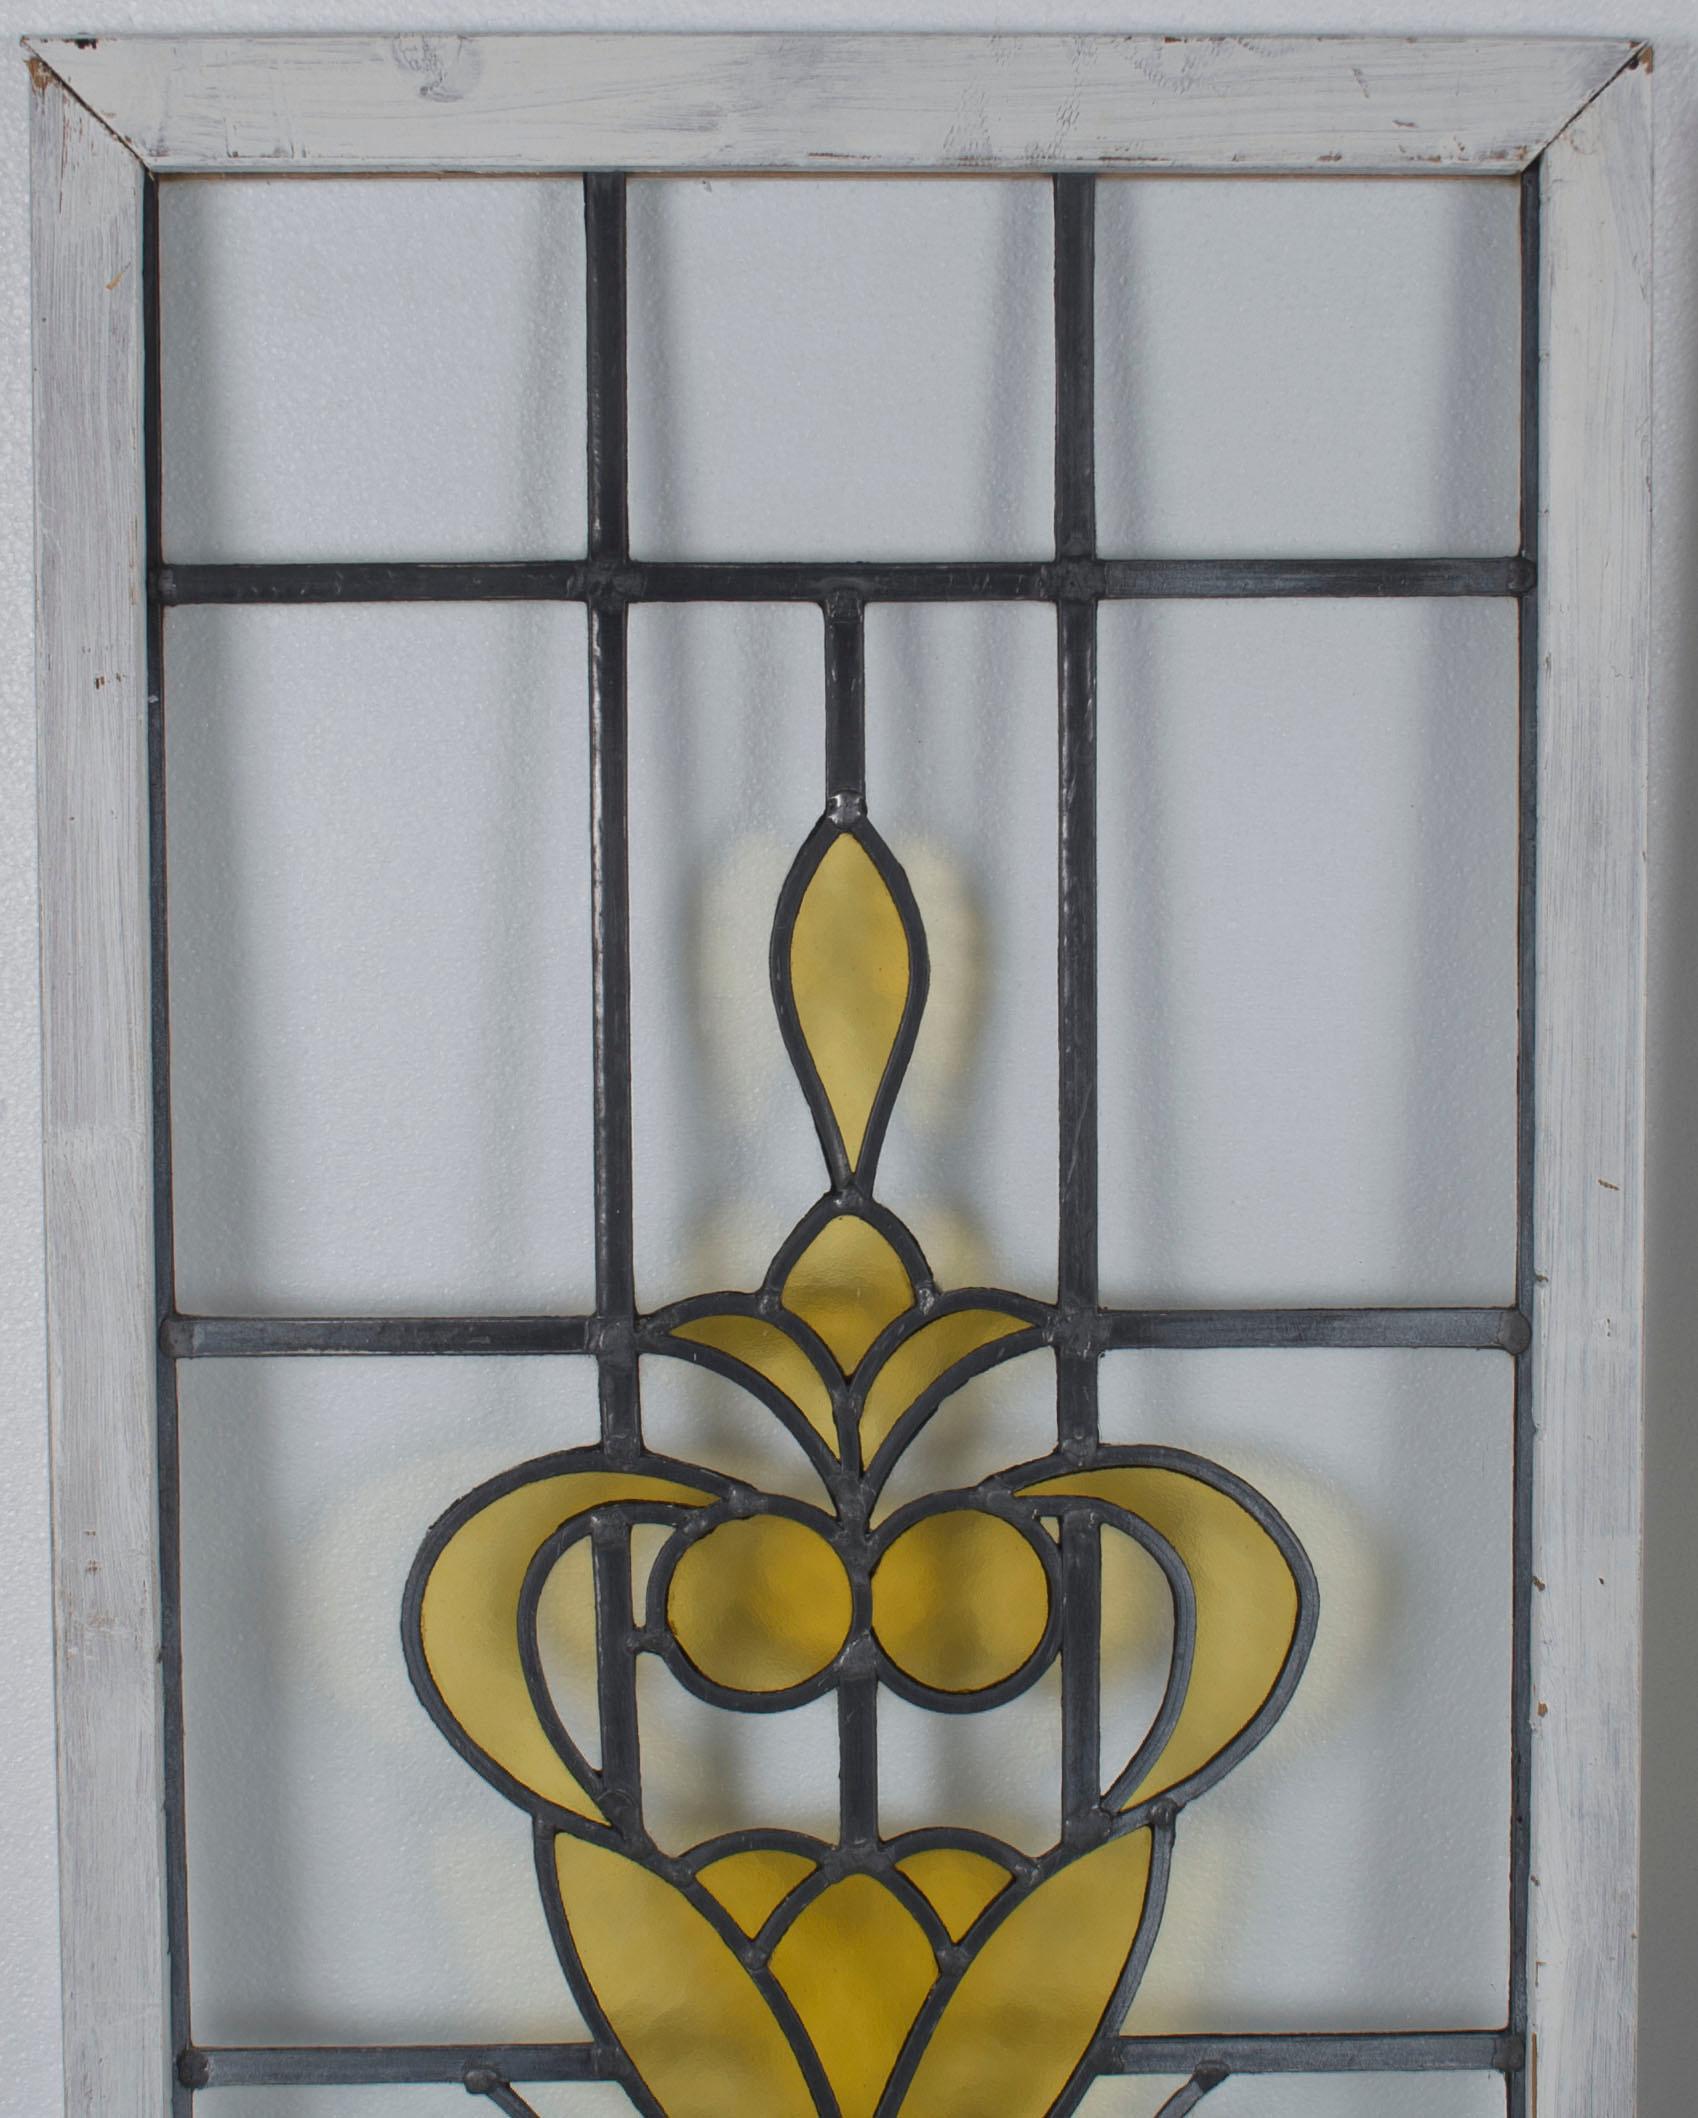 Here we have a pair of leaded stained glass panels. One panel is slightly larger than the other, but both have identical yellow glass patterns. These come from England and were made sometime in the early 20th century. The old, wavy glass is quite